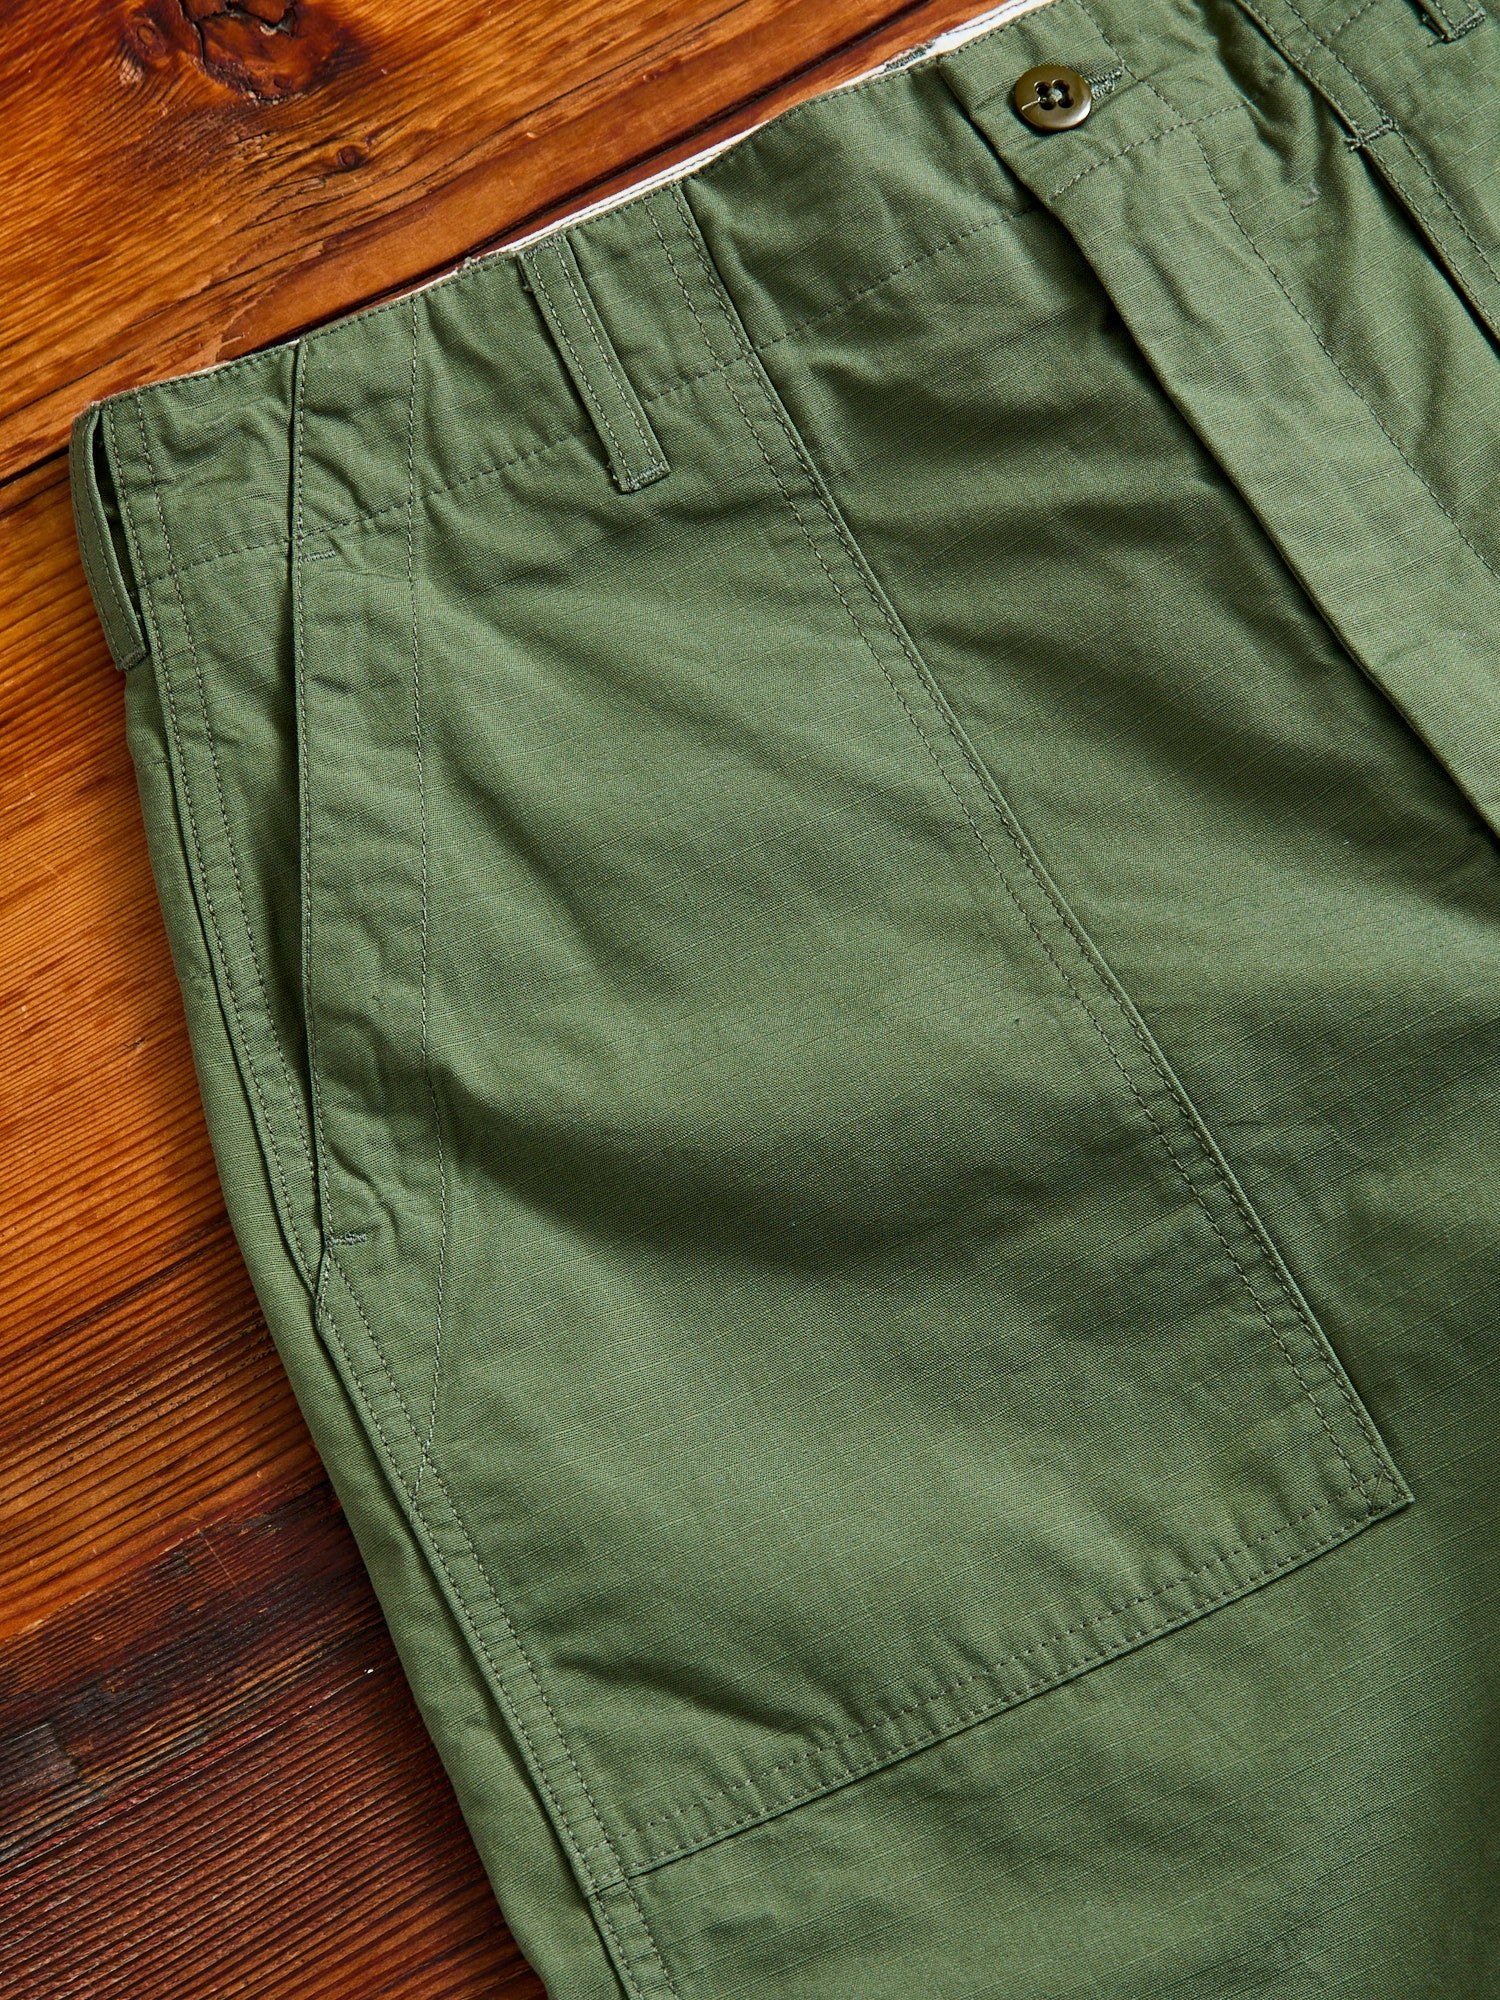 Fatigue Shorts in Olive Cotton Ripstop - 3